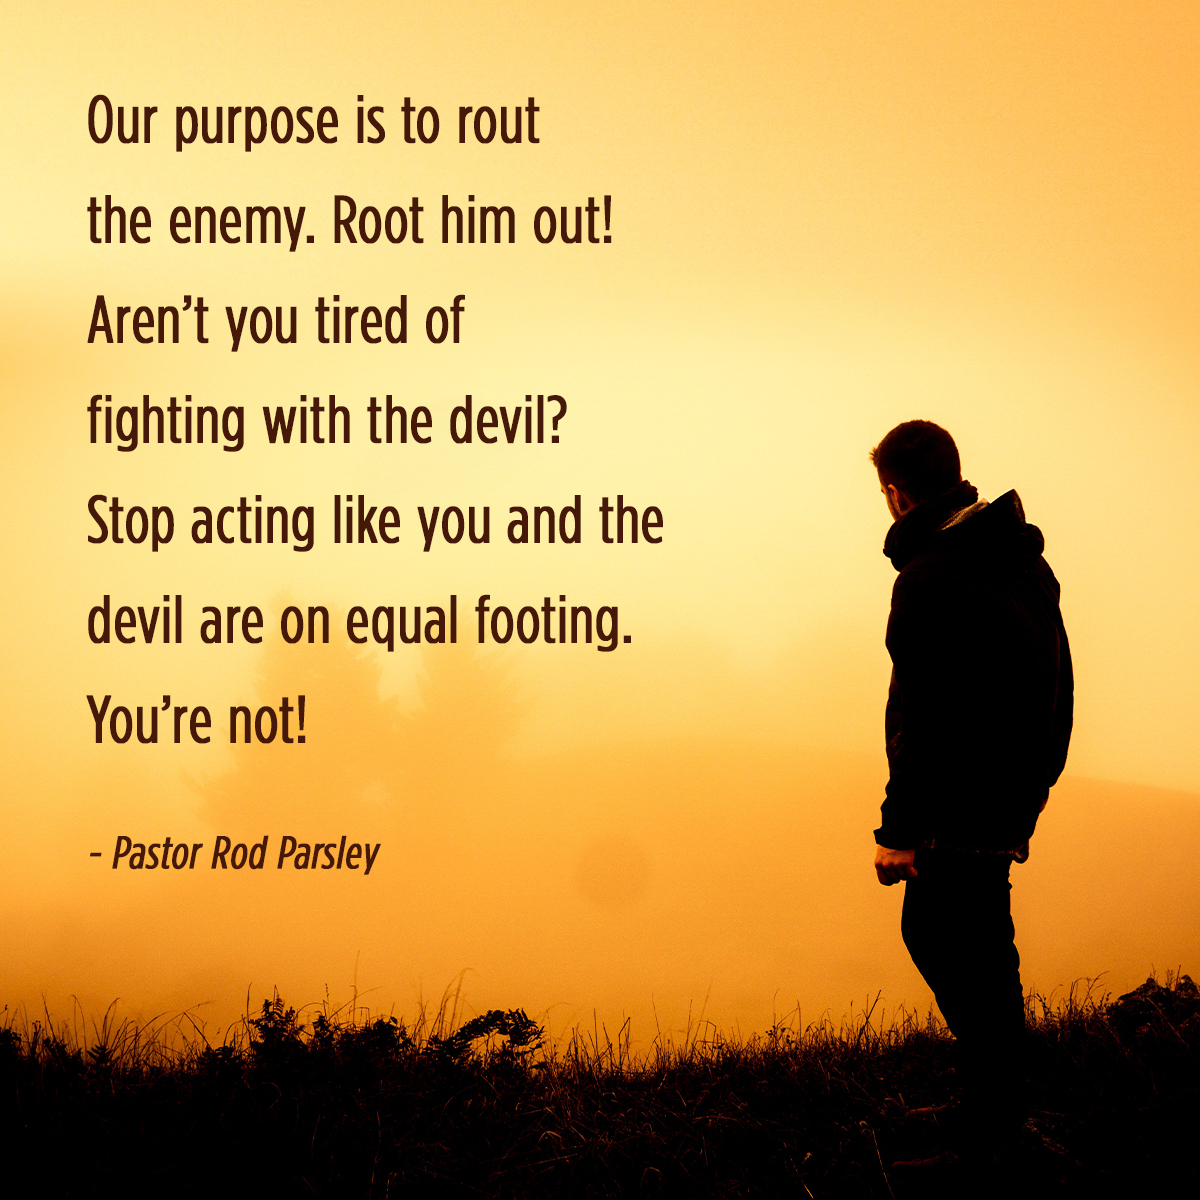 Our purpose is to rout the enemy. Root him out! Aren’t you tired of fighting with the devil? Stop acting like you and the devil are on equal footing. You’re not!” – Pastor Rod Parsley